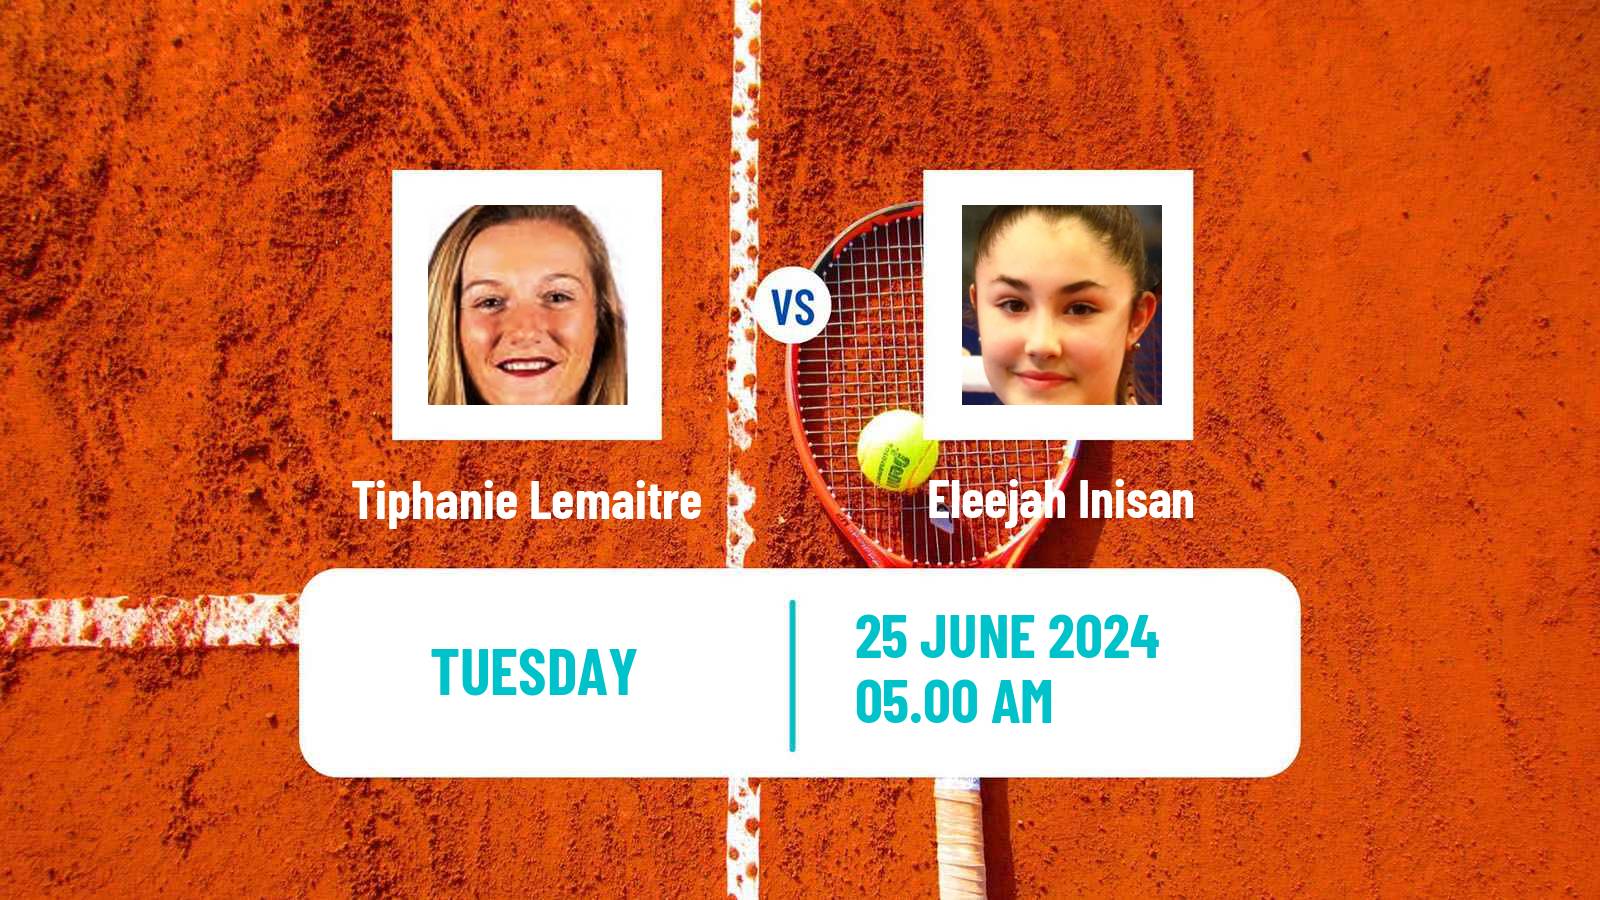 Tennis ITF W35 Perigueux Women Tiphanie Lemaitre - Eleejah Inisan